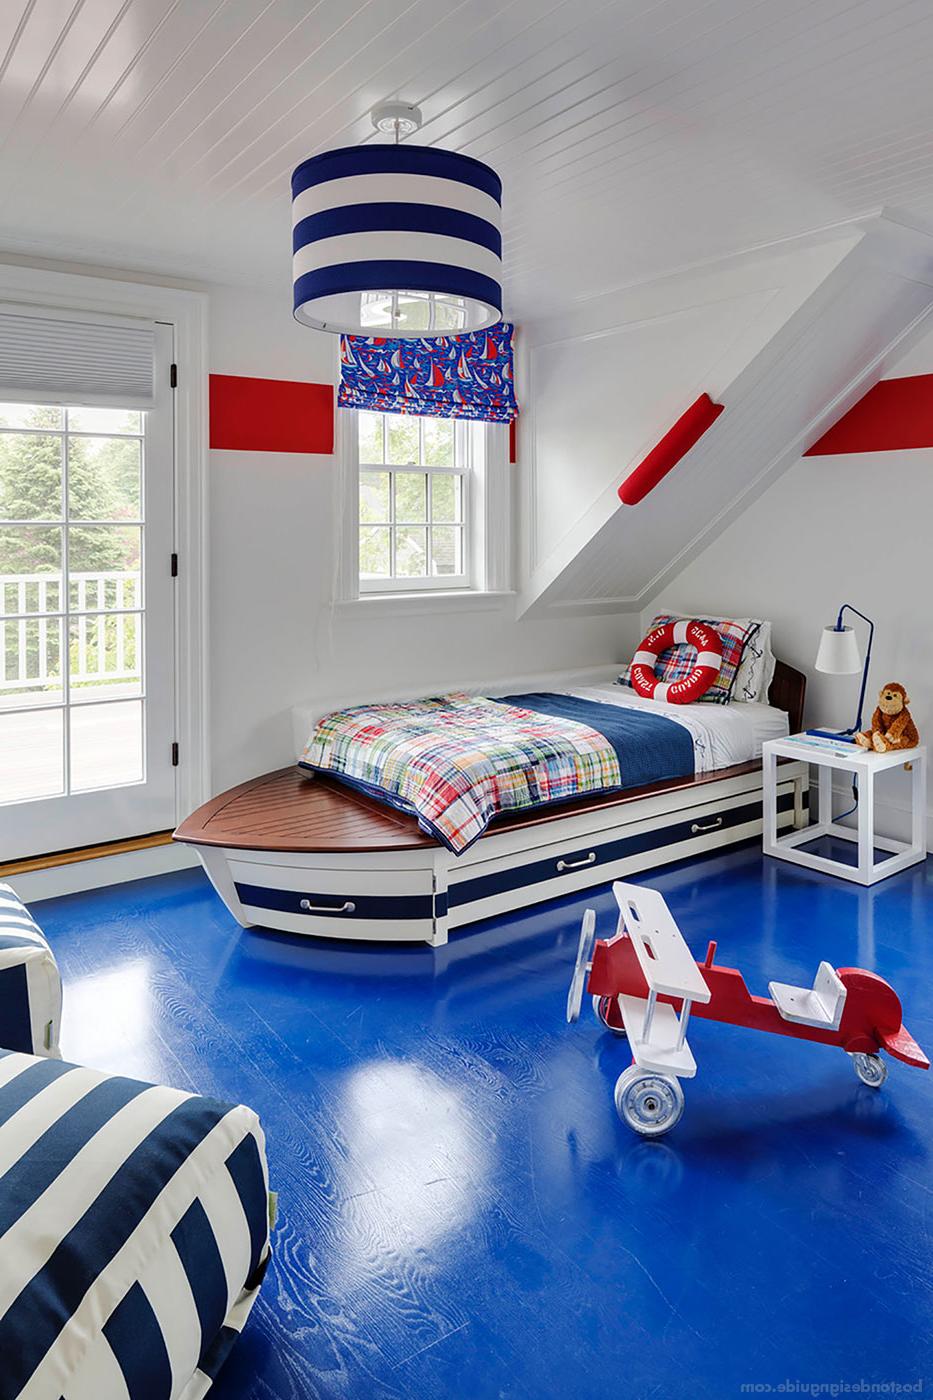 Nautical red, white and blue children's room by Patrick Ahearn建筑事务所